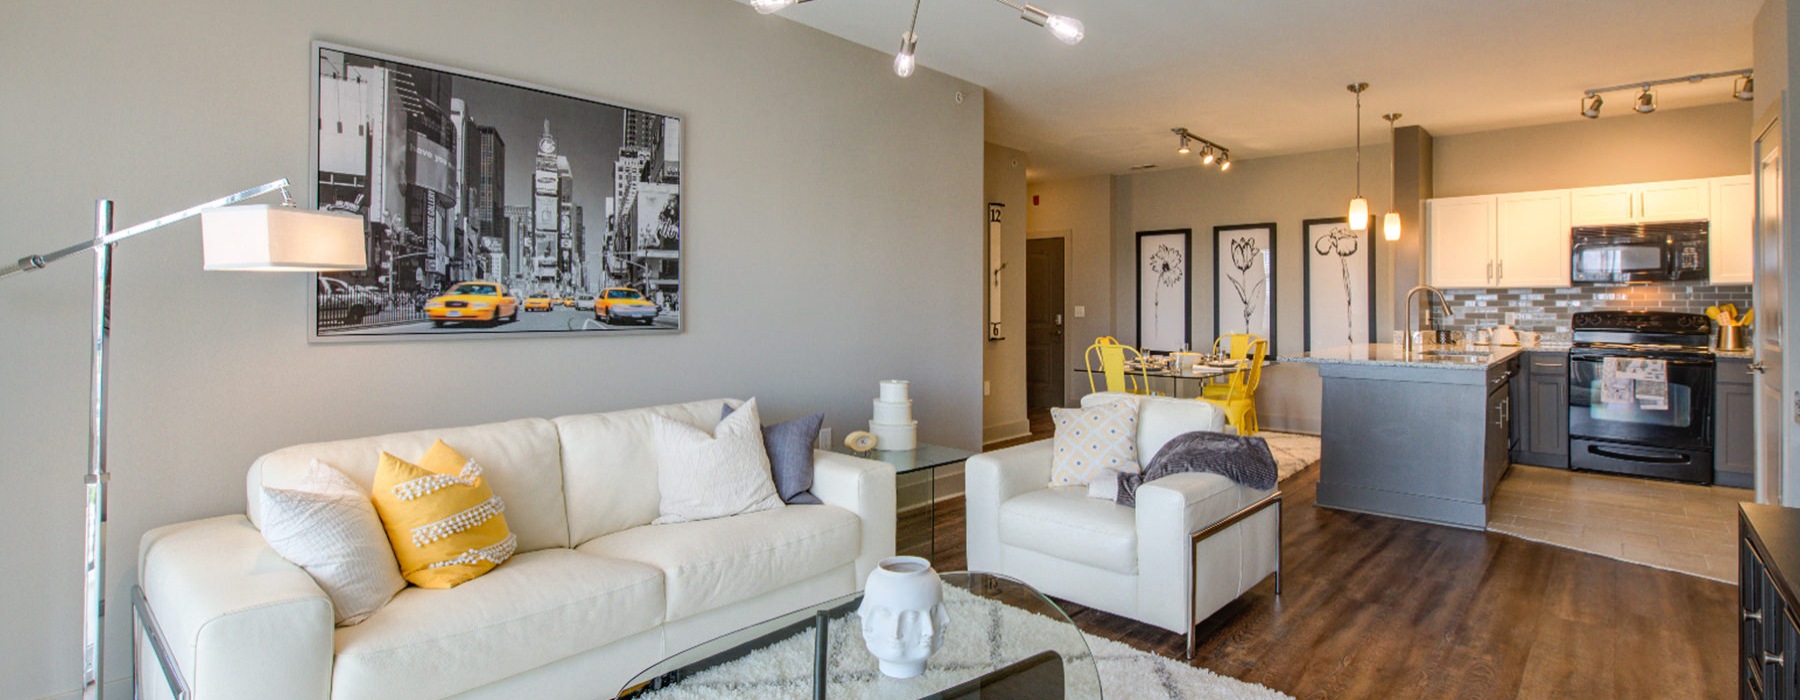 Living room area at The Lofts At Willow Creek